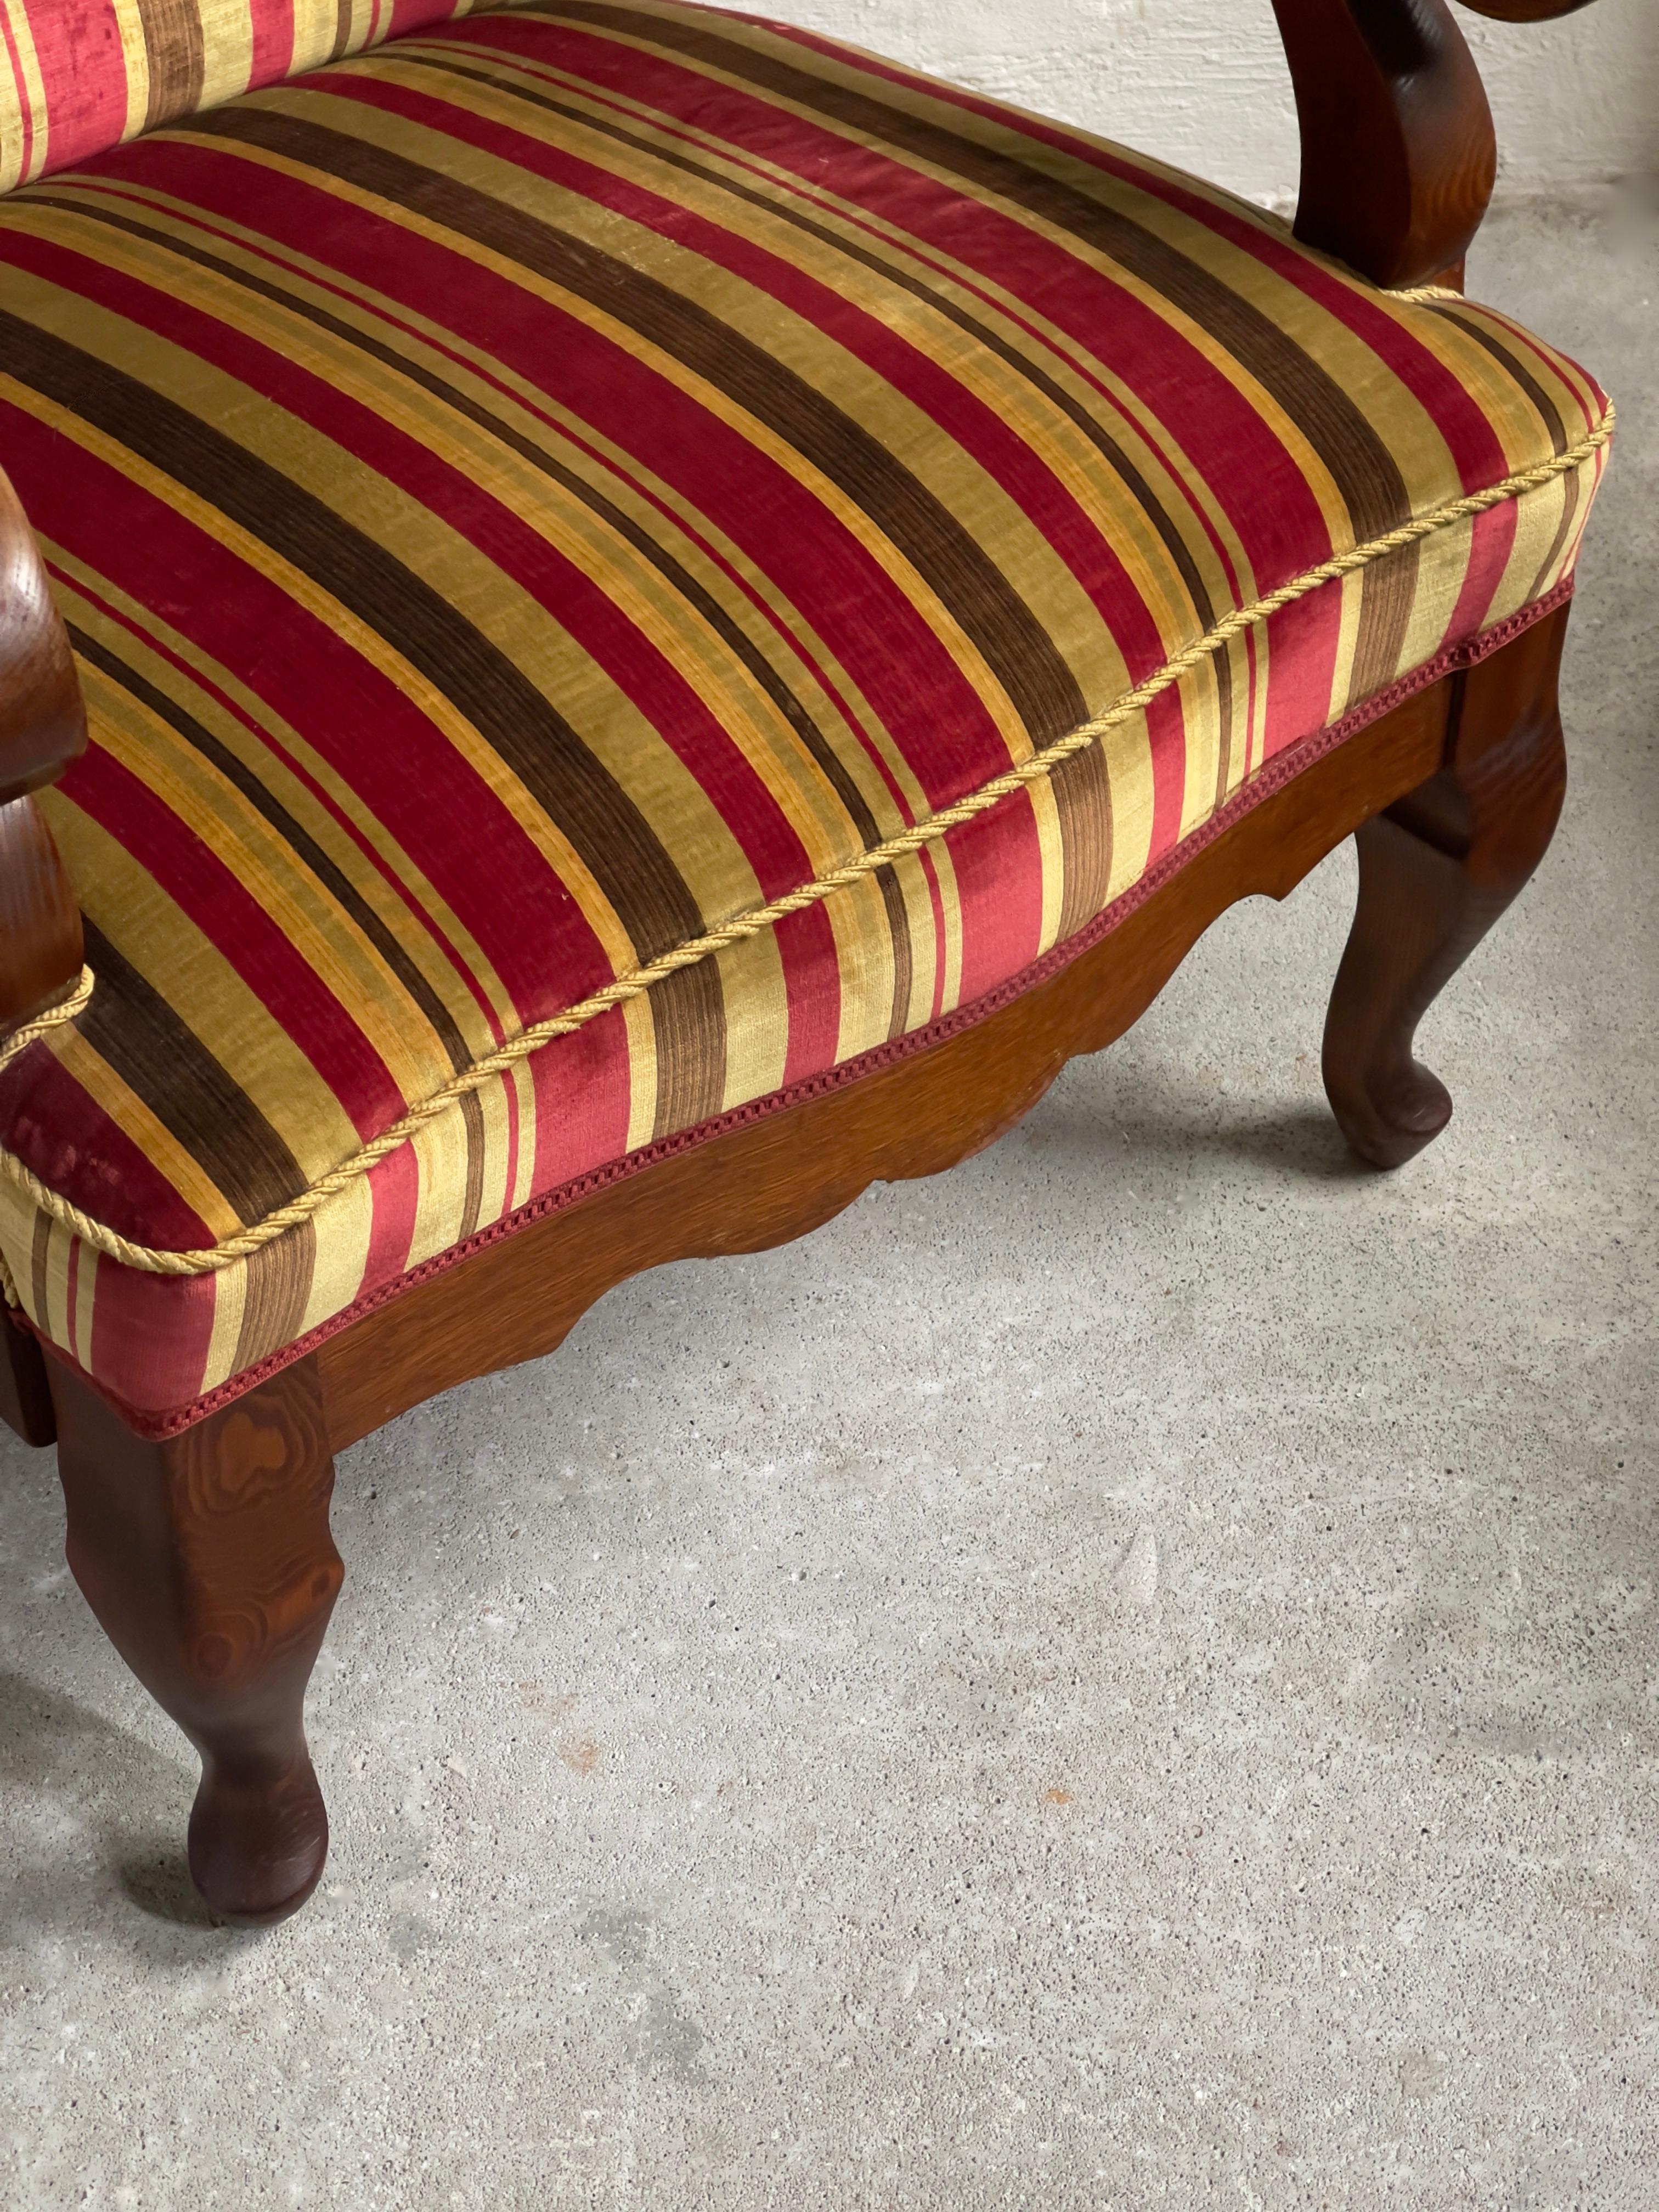 1930s Danish Modern Lounge Chair in Solid Oak and Striped Velvet Upholstery  For Sale 7